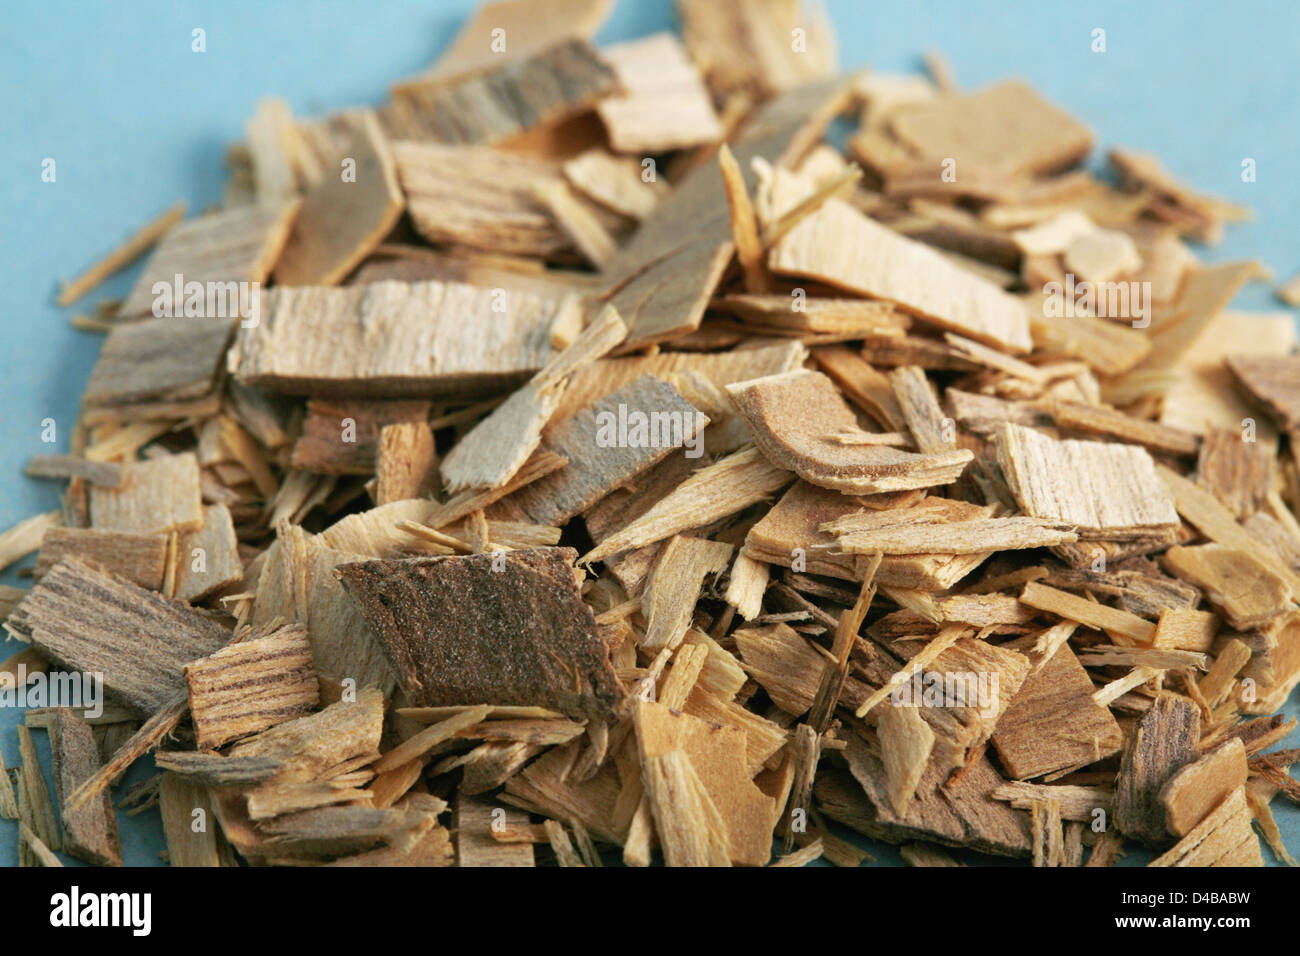 Quillaia wood has long history medicinal use Andean people treating chest problems. Today extract used in cough medicines. Stock Photo